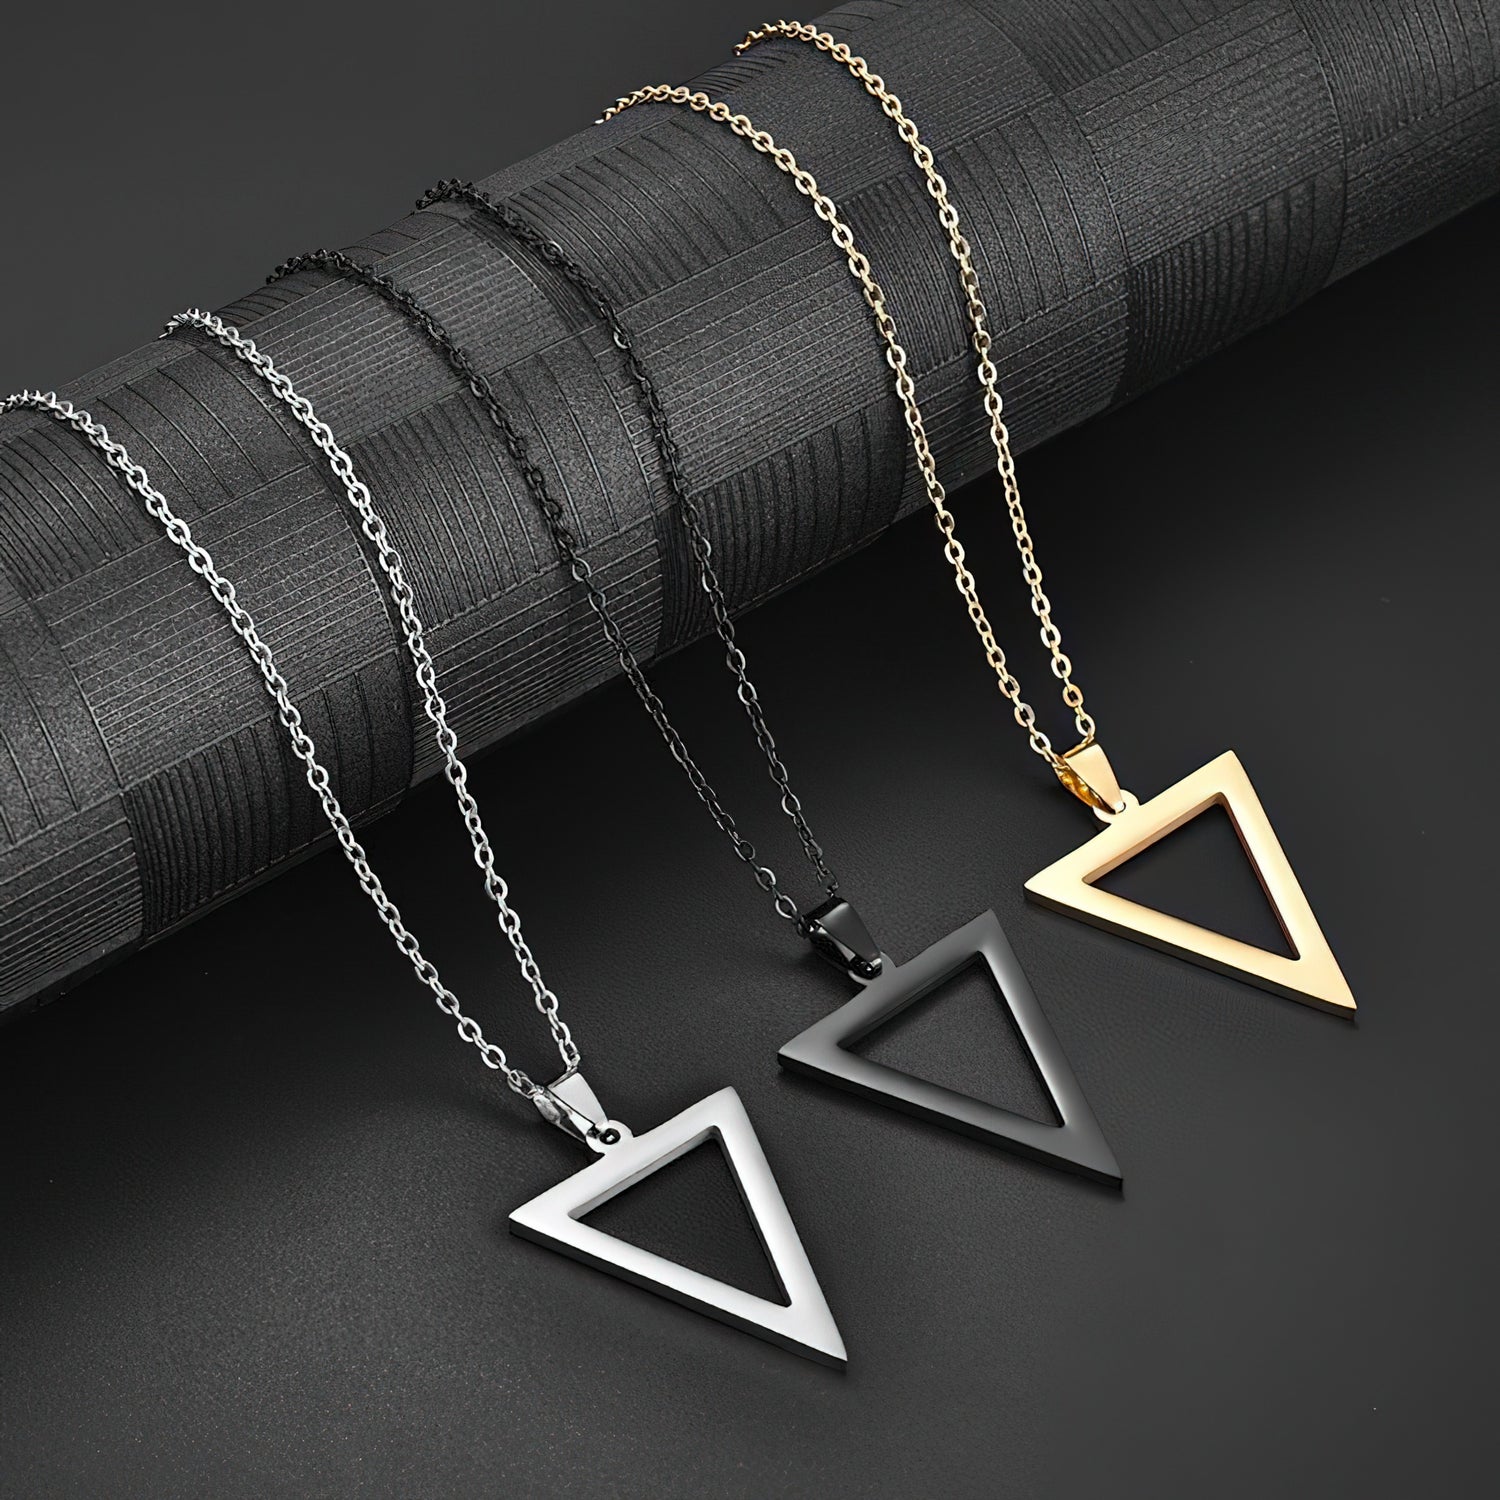 Popular Men Necklace,Interlocking Square Triangle Male Pendant,Stainless  Steel Modern Trendy Geometric Necklaces,Hipster Jewelry